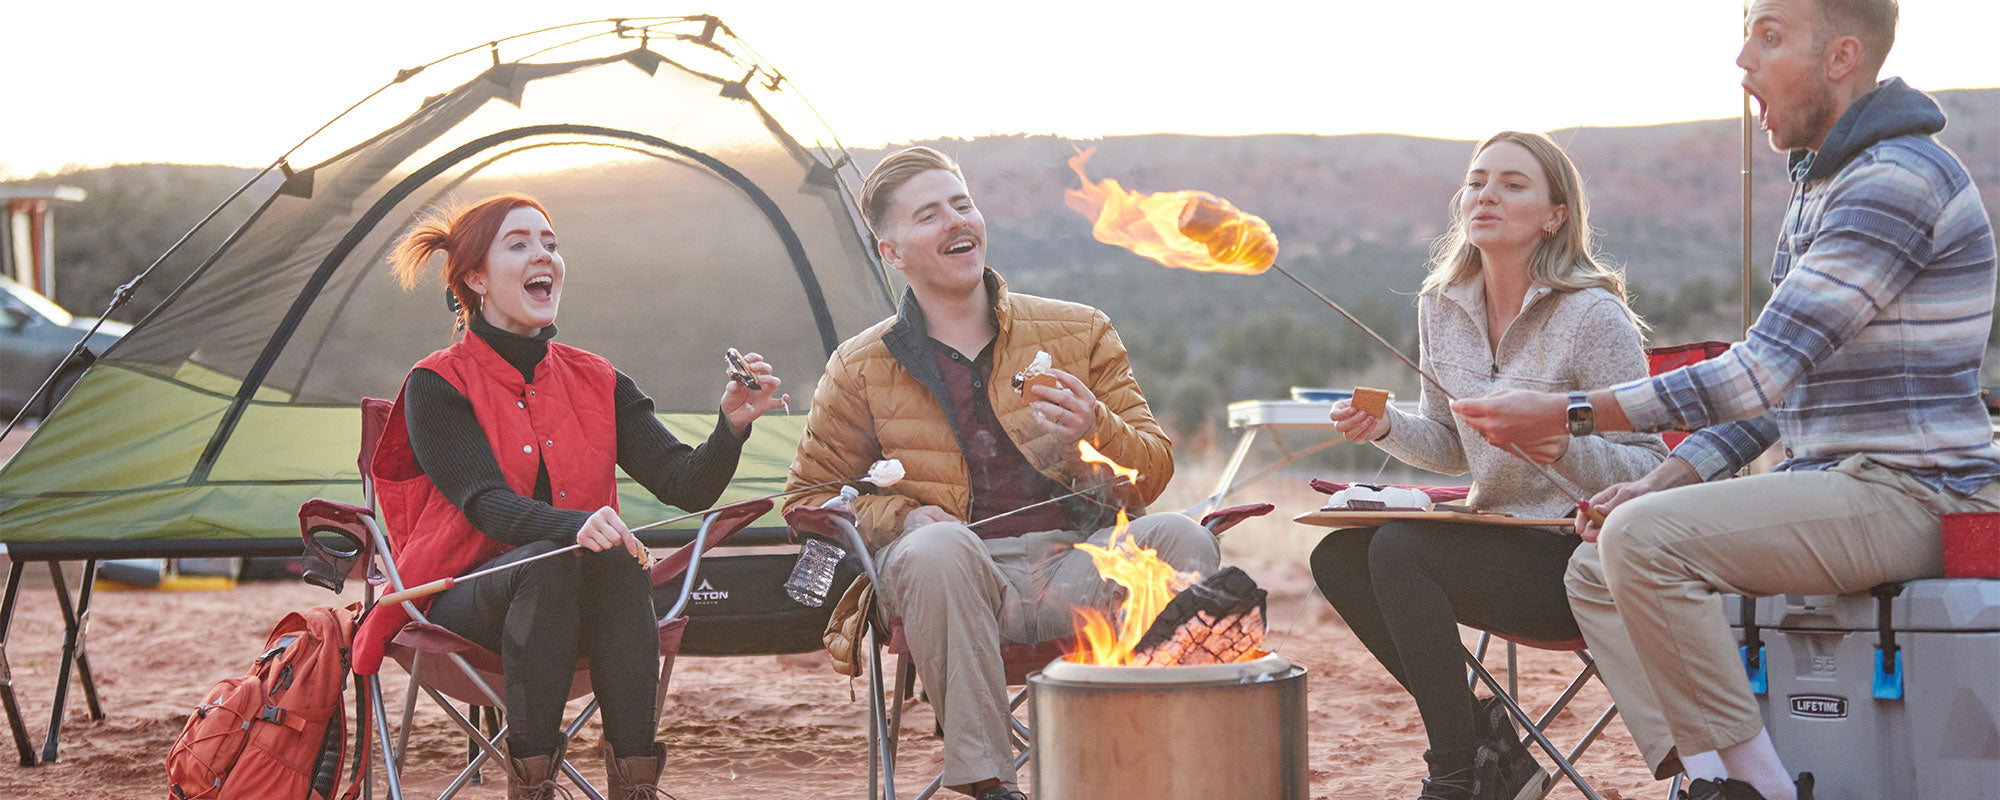 A group of four friends roast marshmallows surrounded by TETON Sports camping gear.